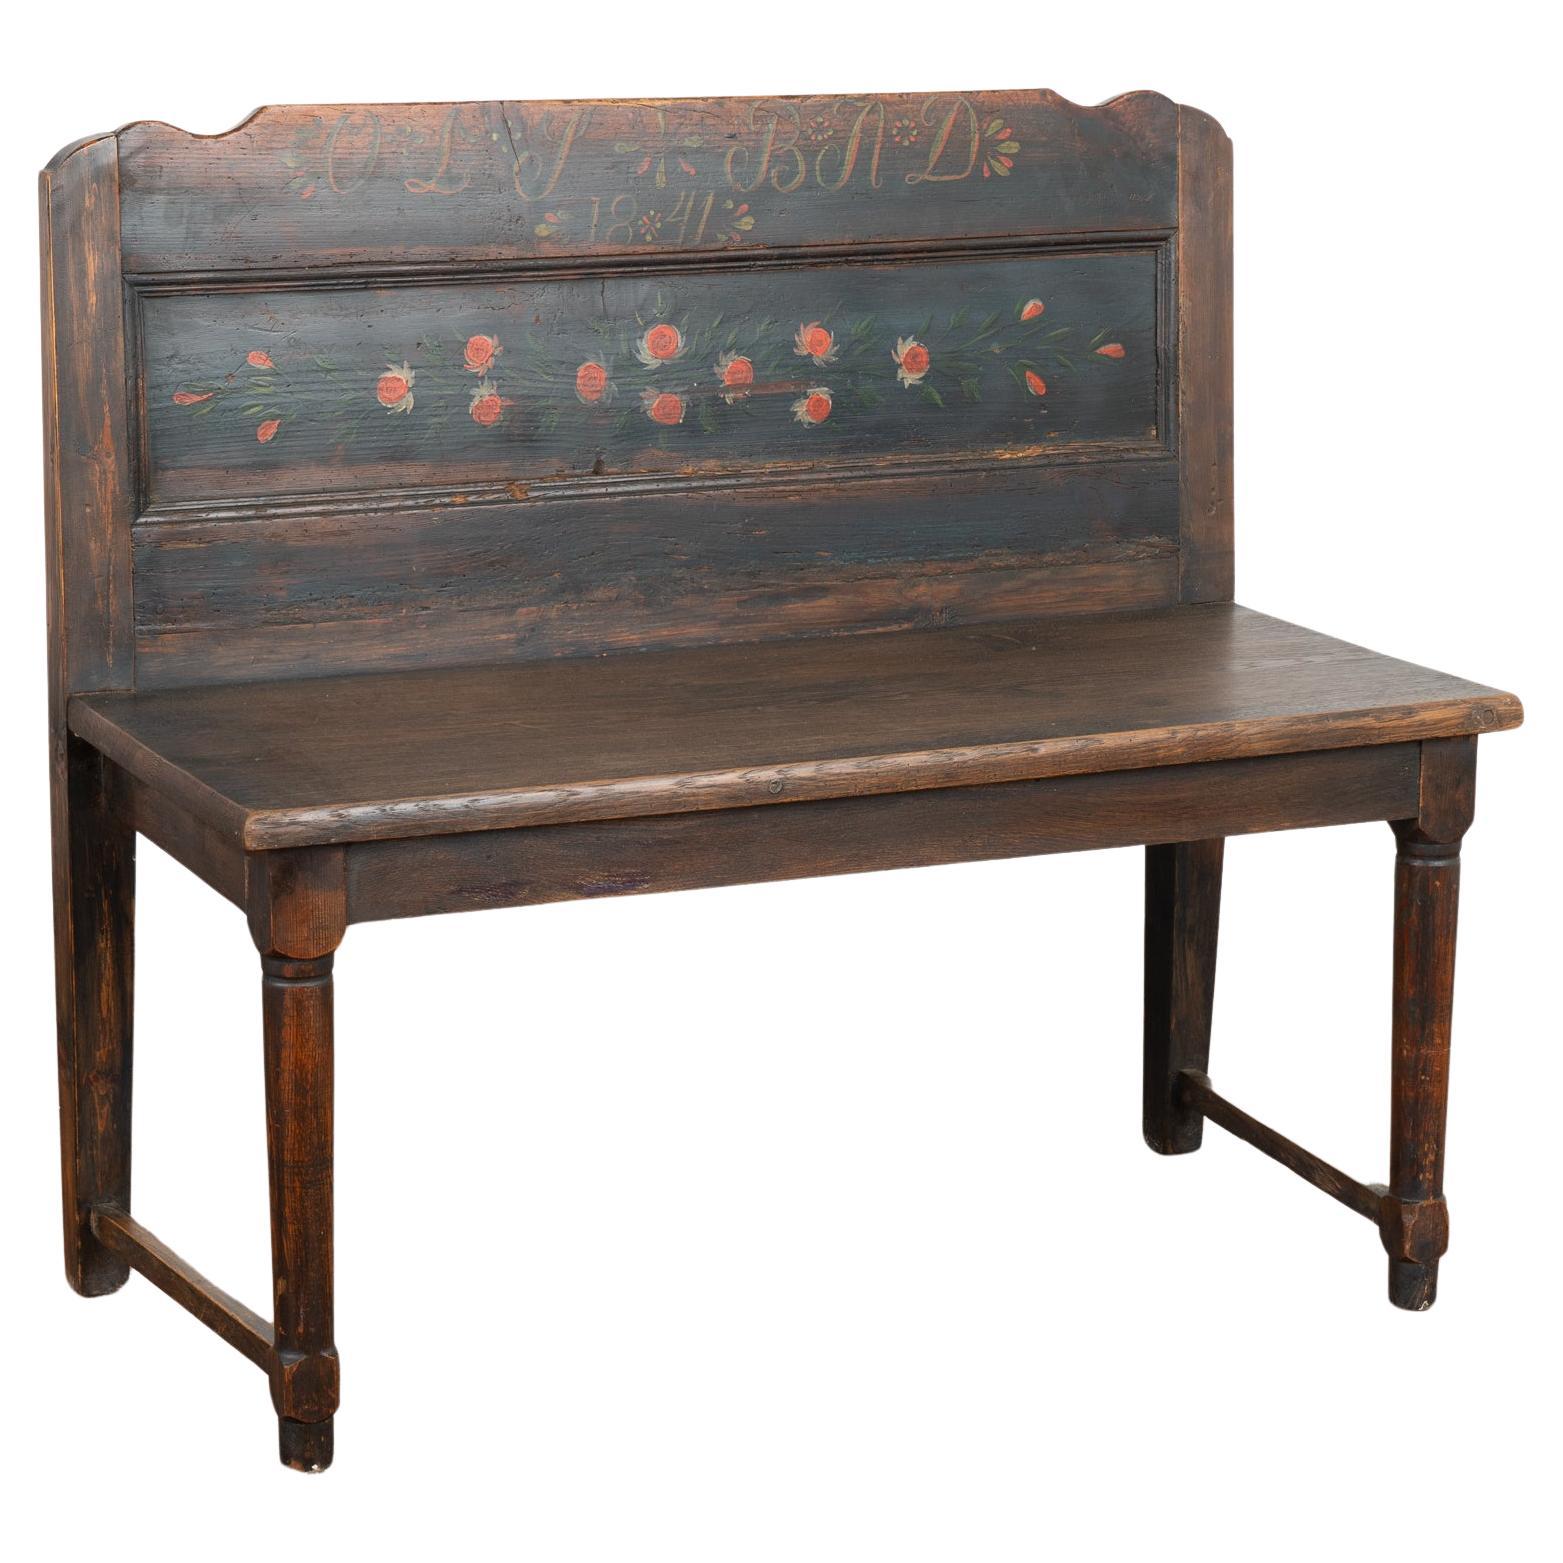 Original Painted Small Bench, Hungary Dated 1841